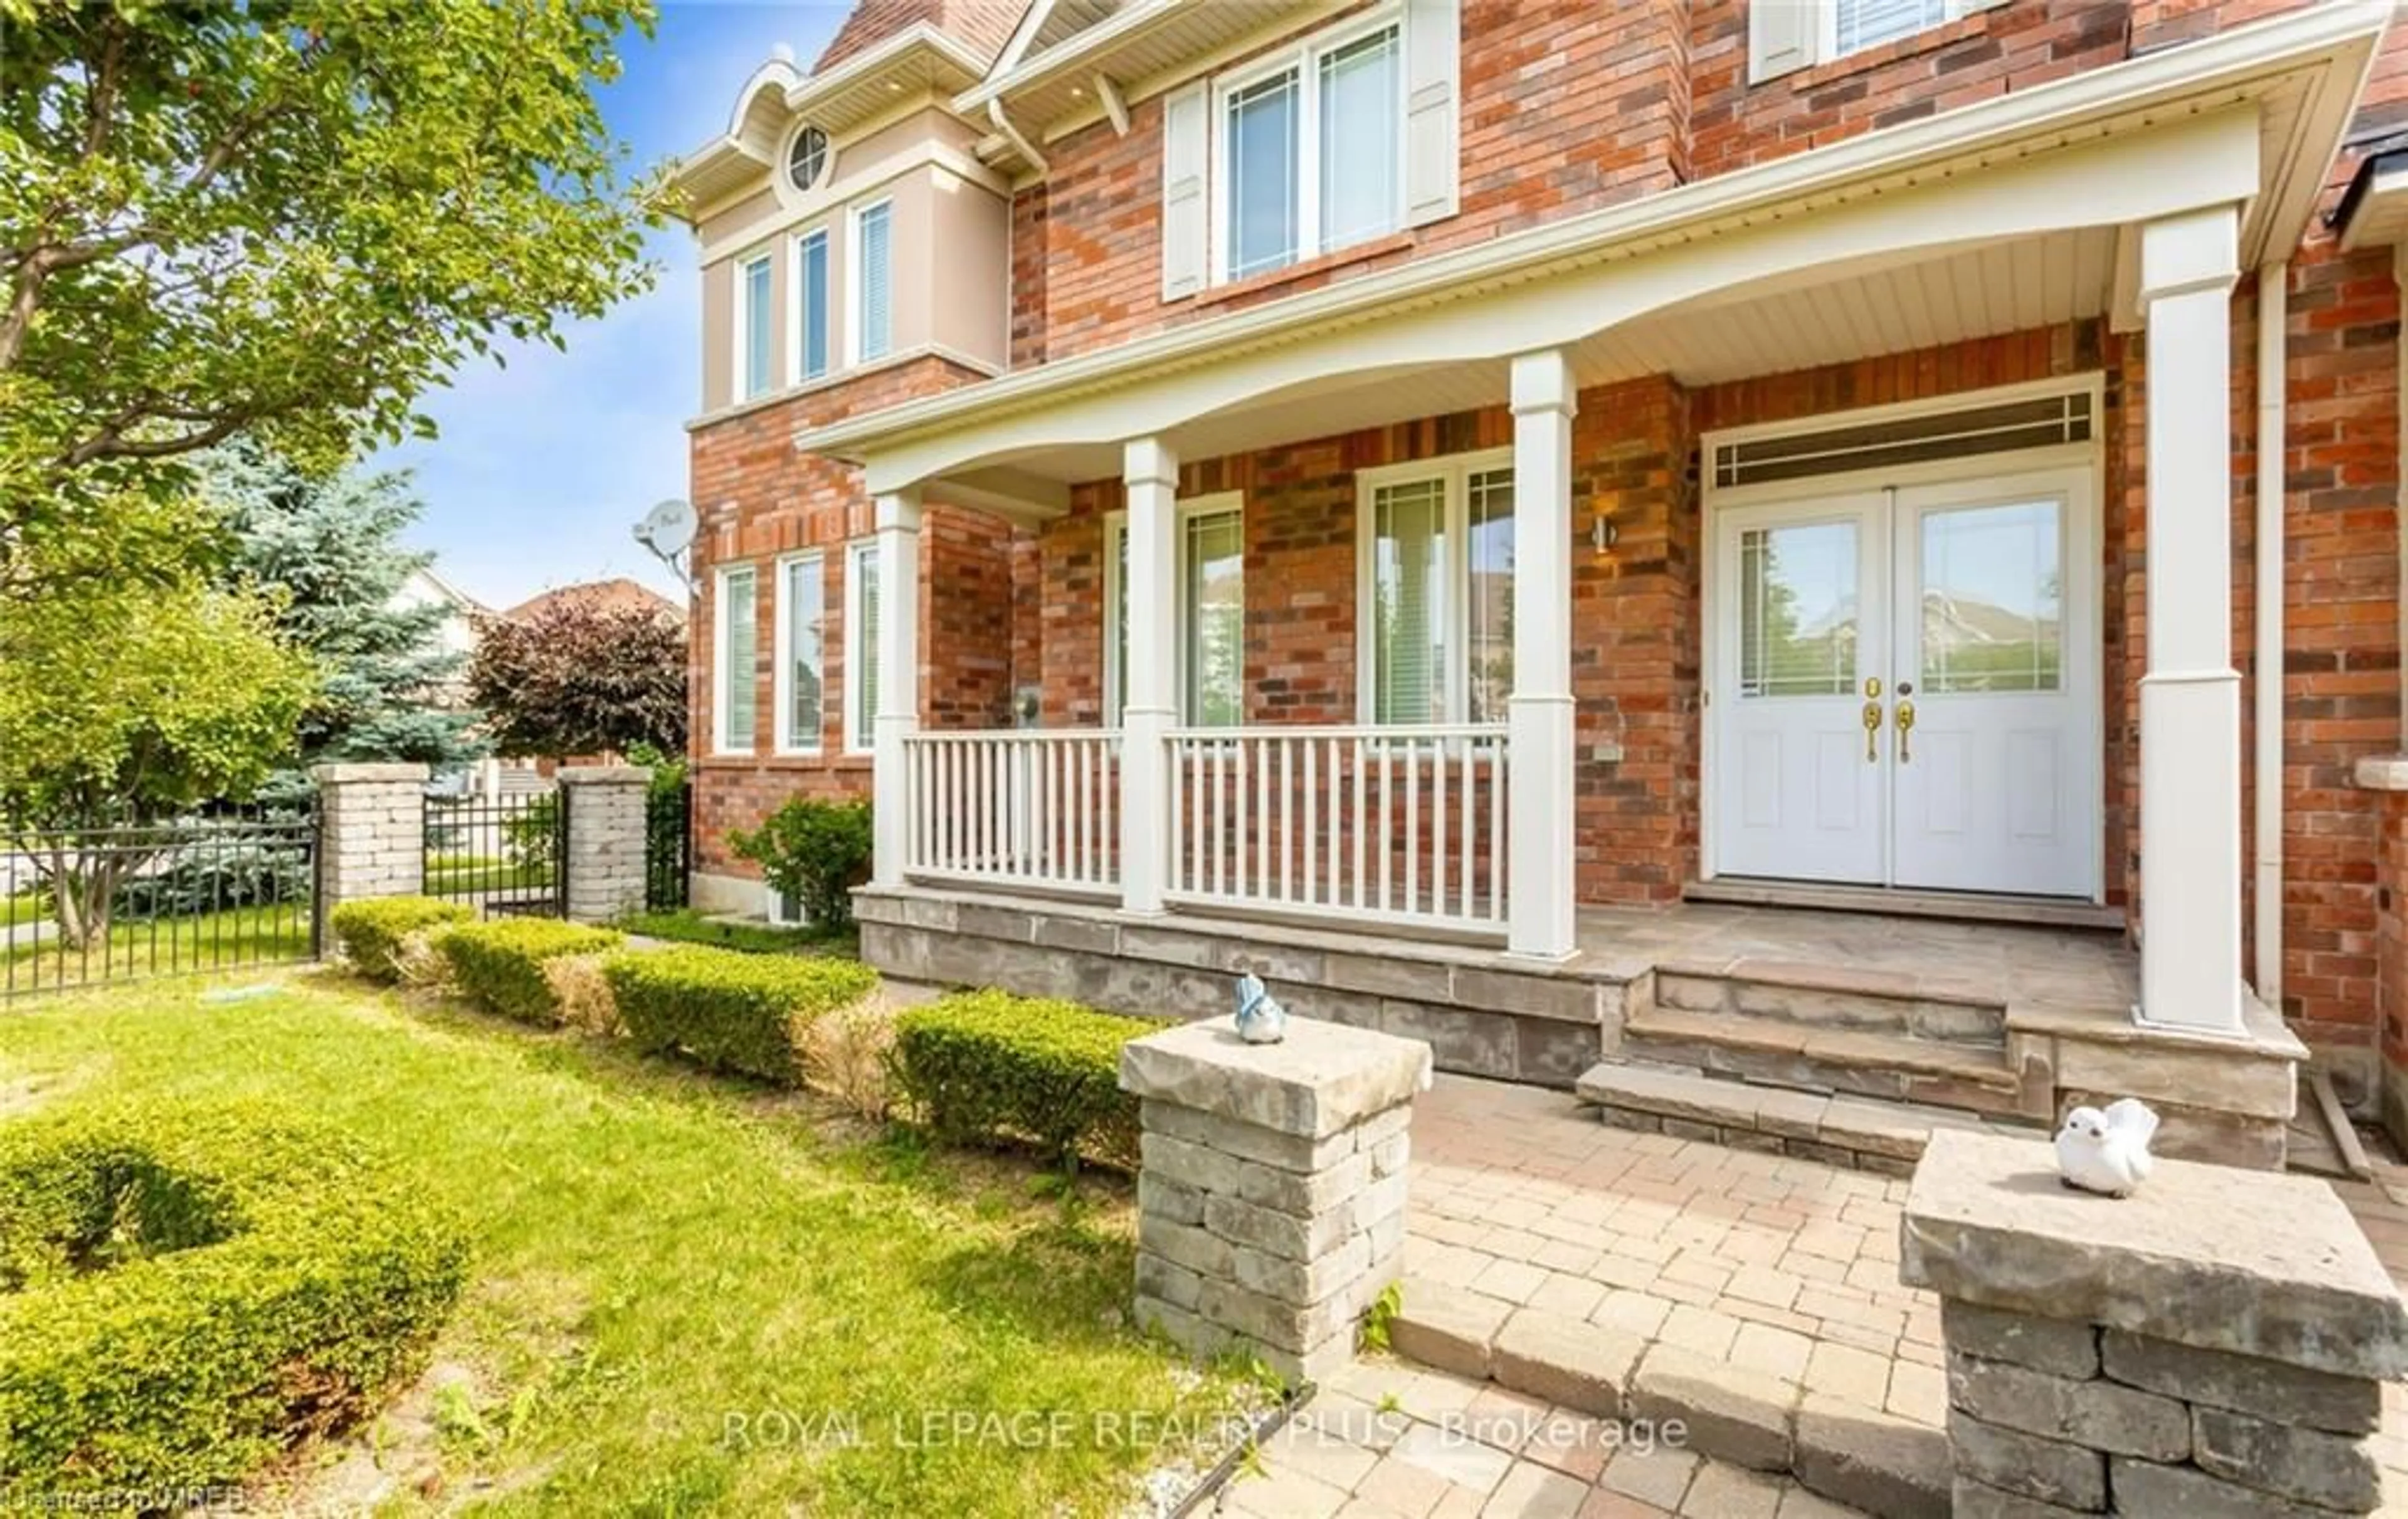 Home with brick exterior material for 7281 Saint Barbara Blvd, Mississauga Ontario L5W 0C1